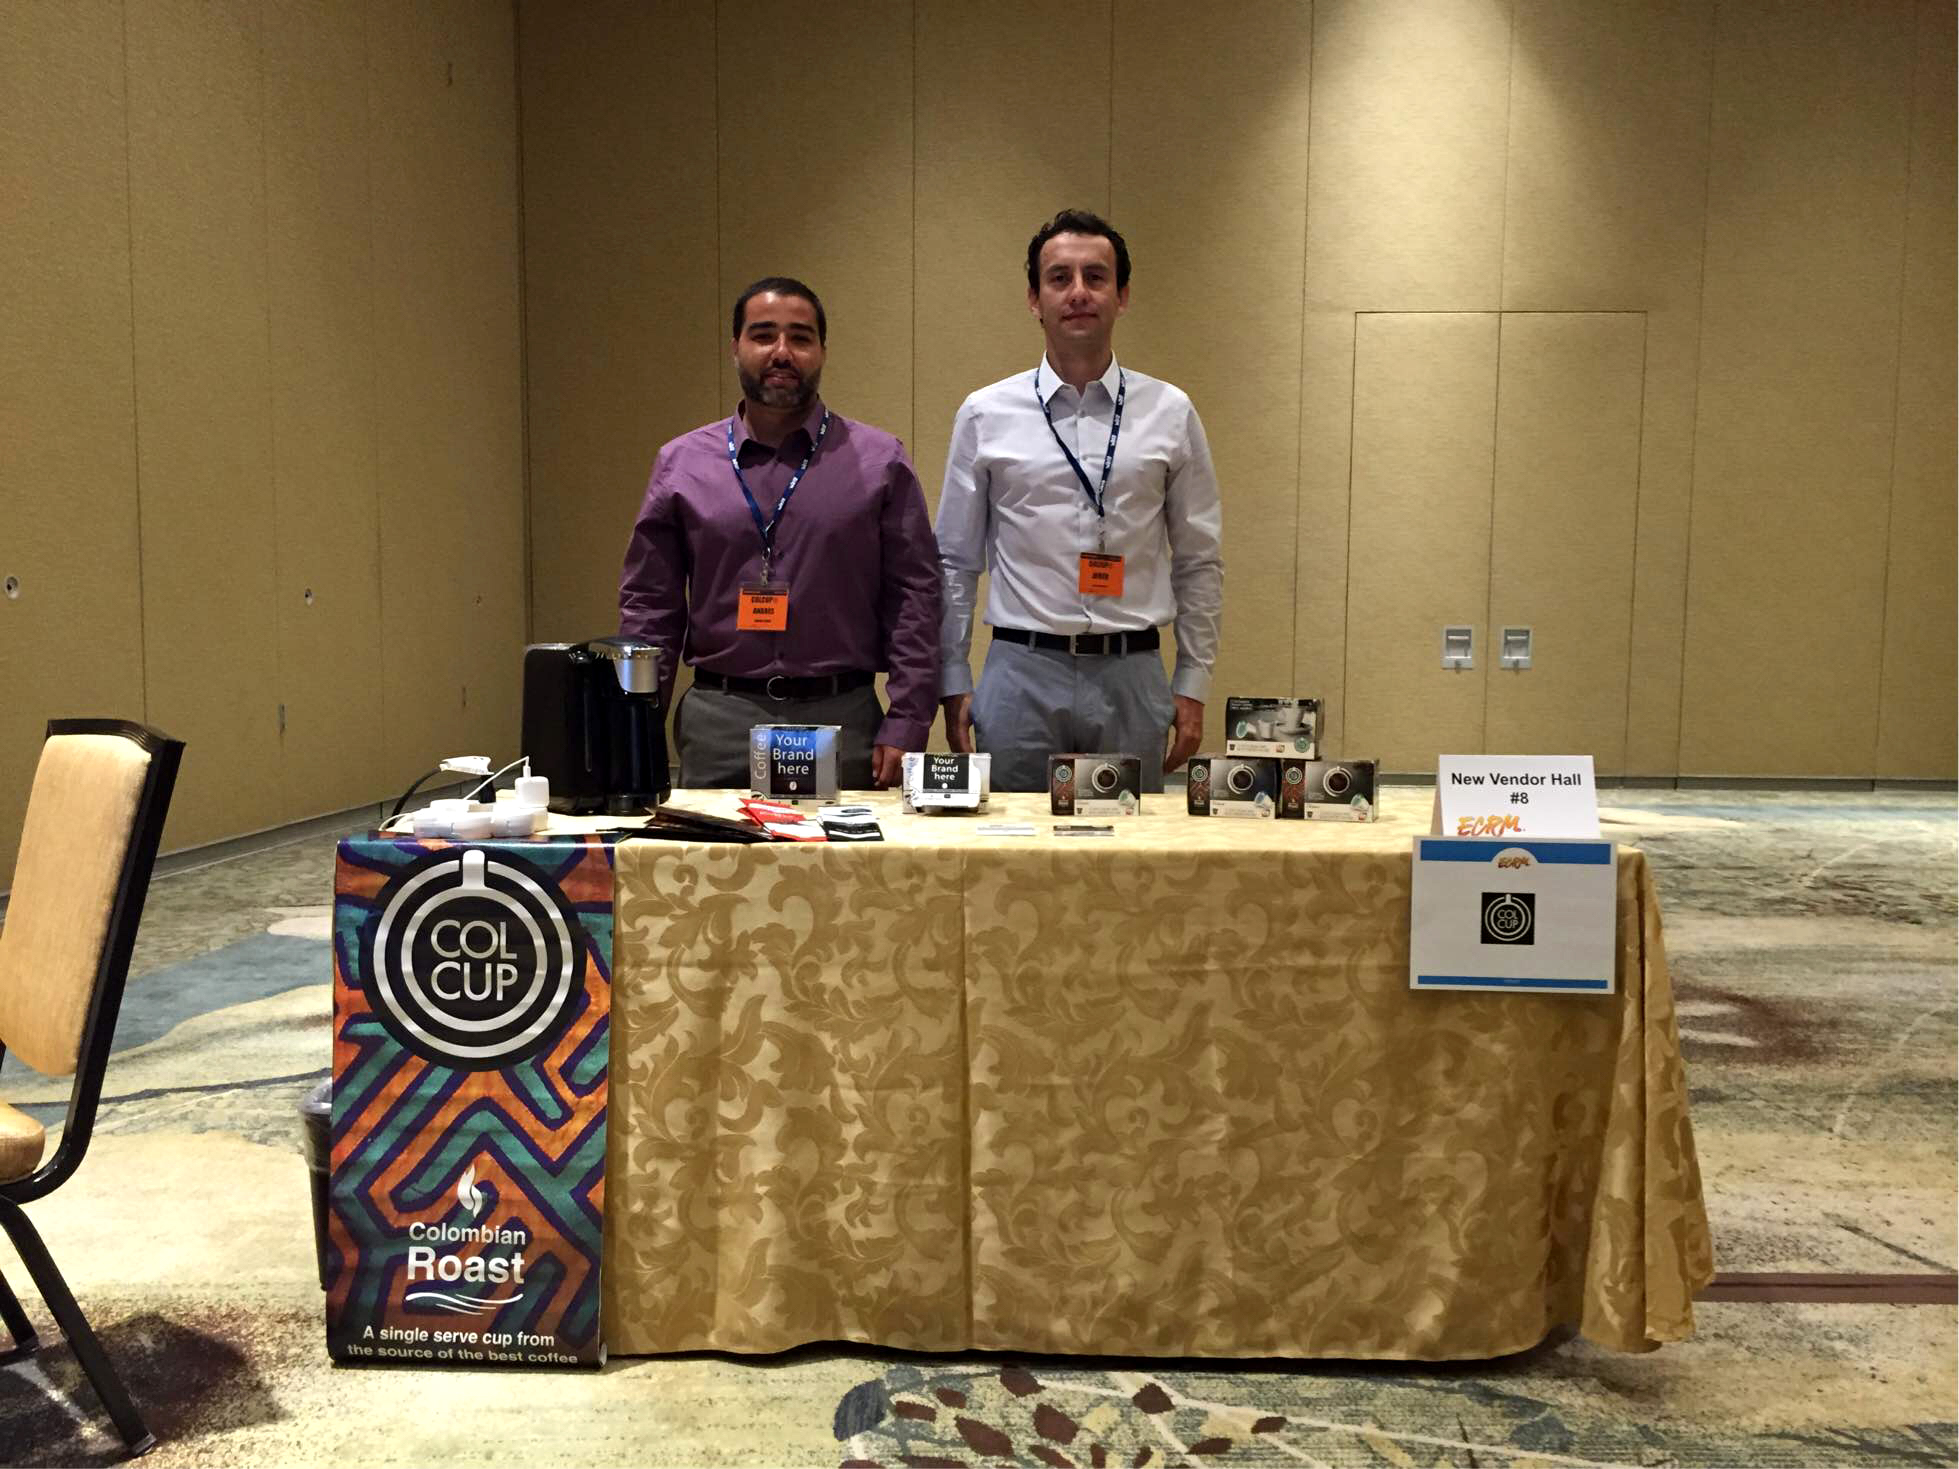 Andres Uribe and Javier Valderrama of Colcup display their single serve cups of 100% Colombian Coffee.